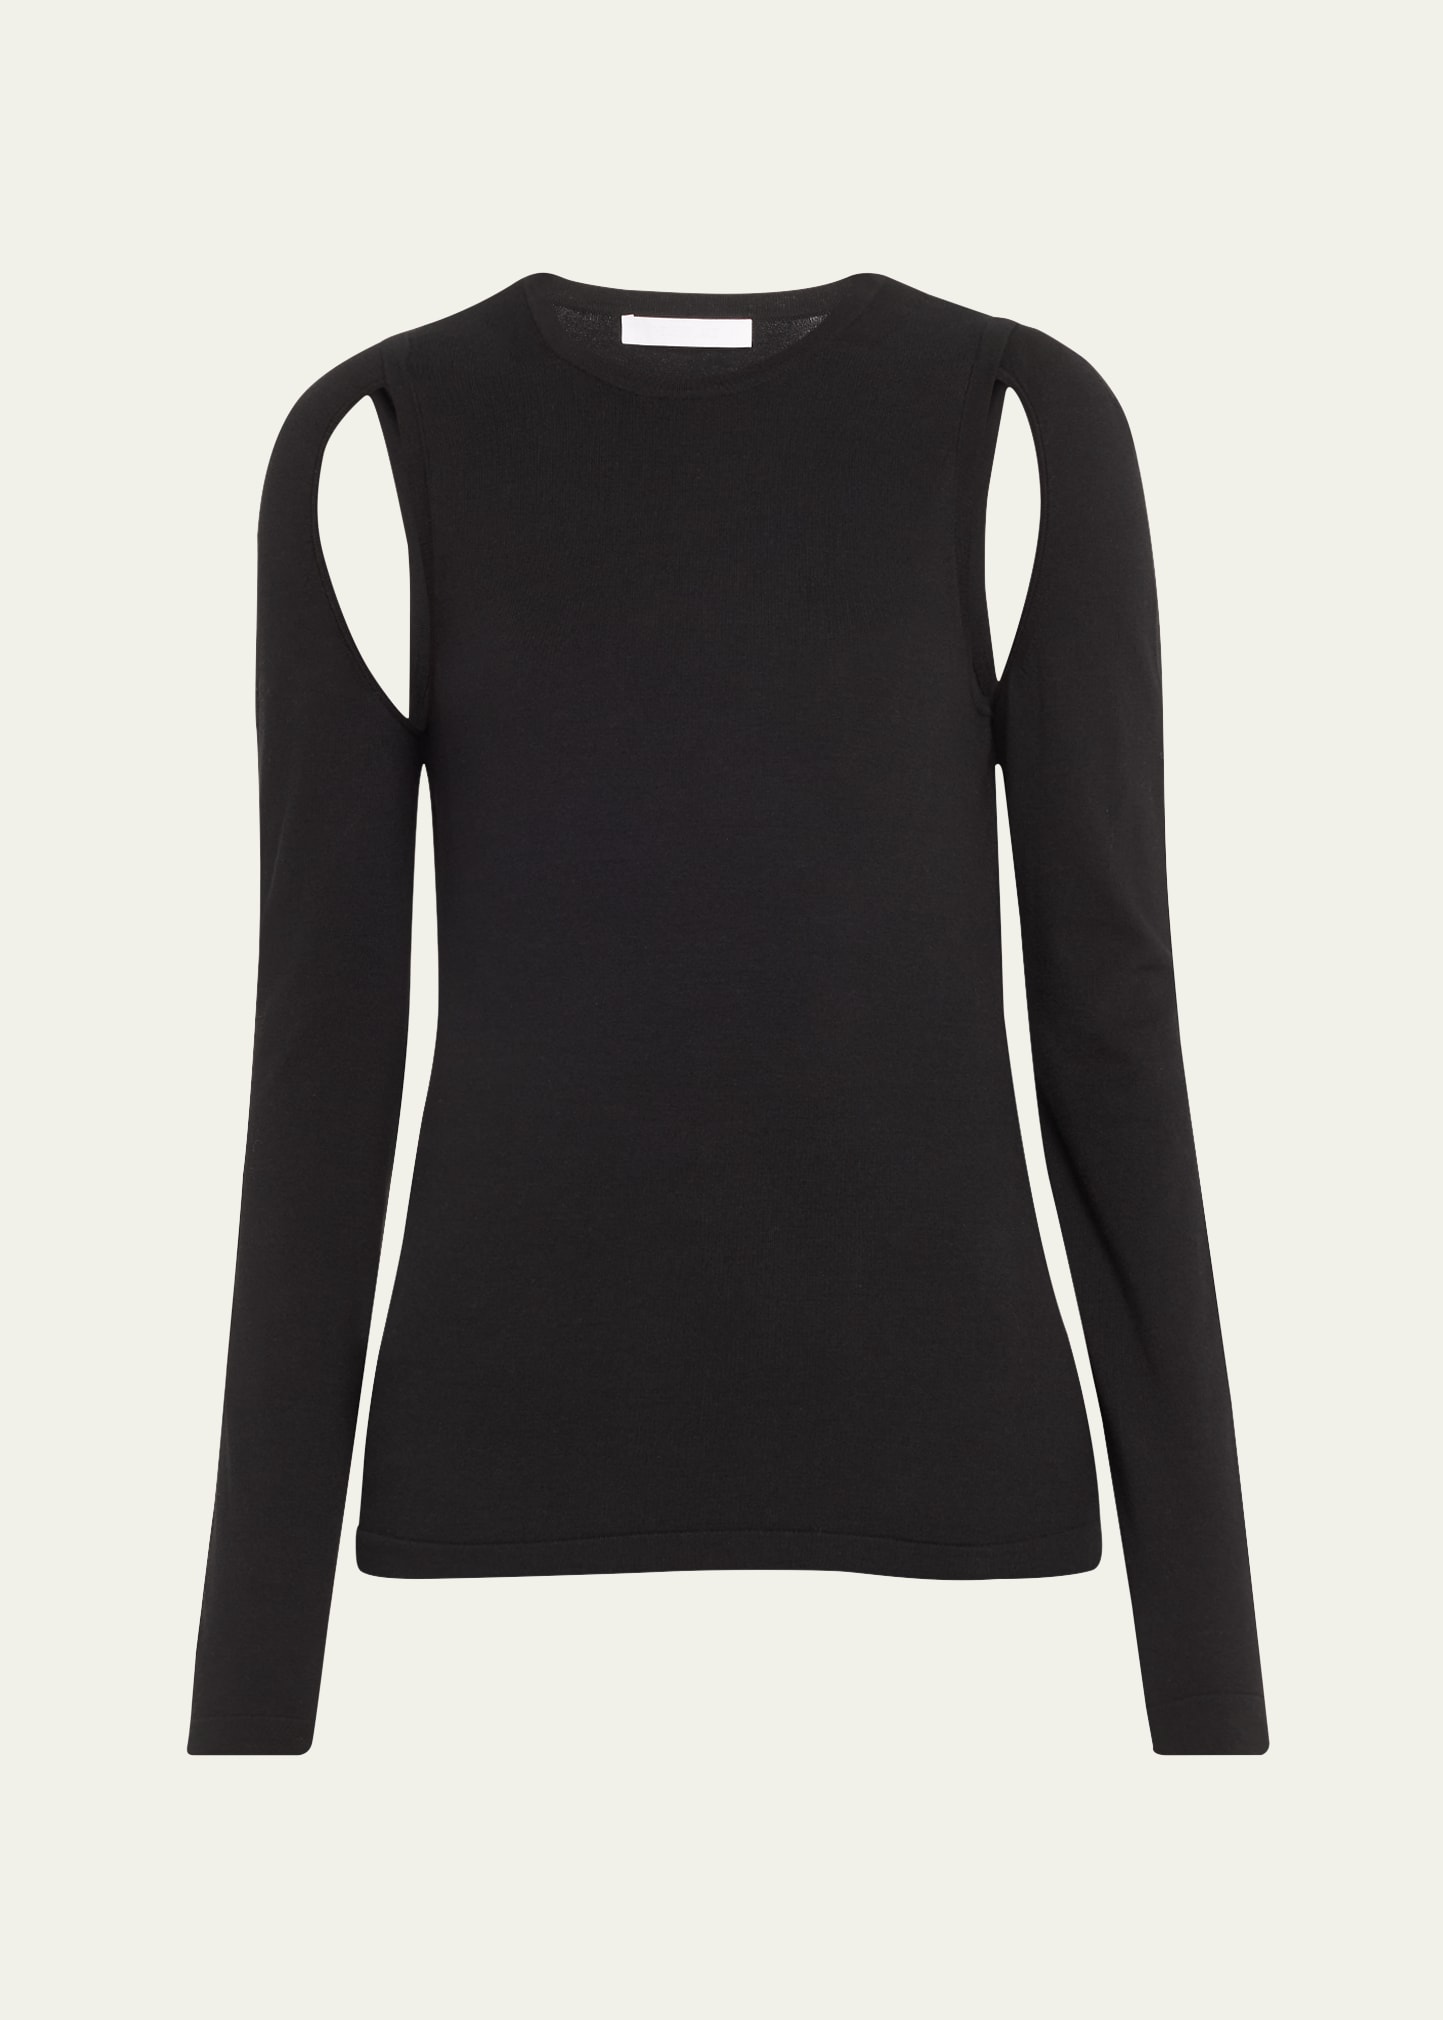 Cut-Out Long-Sleeve Knit Top